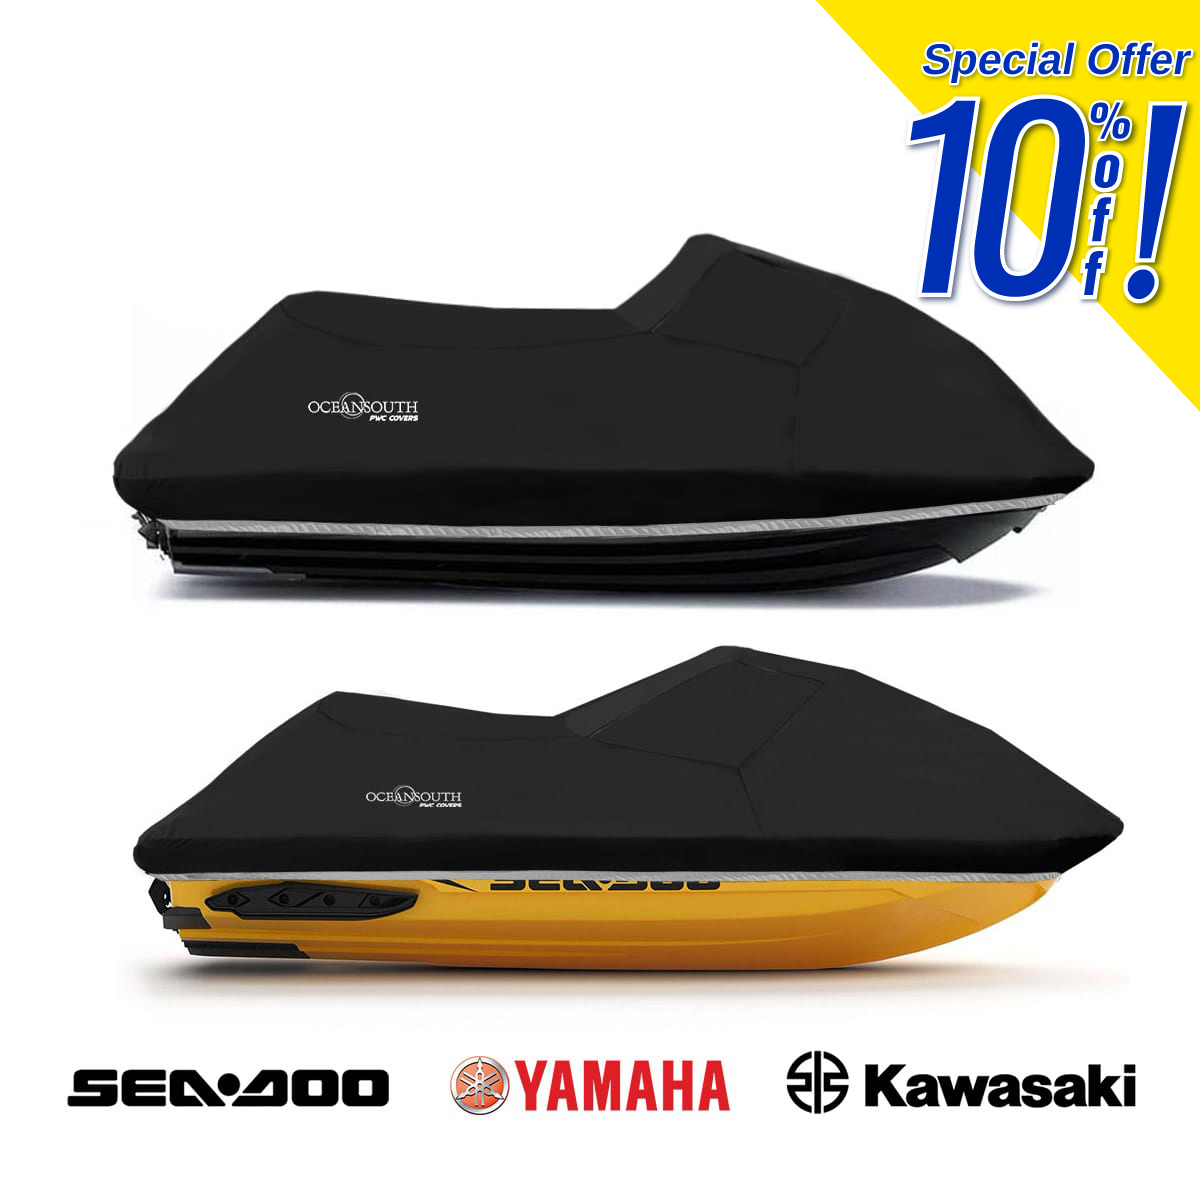 10% off sale, Oceansouth’s Jet Ski/PWC custom covers